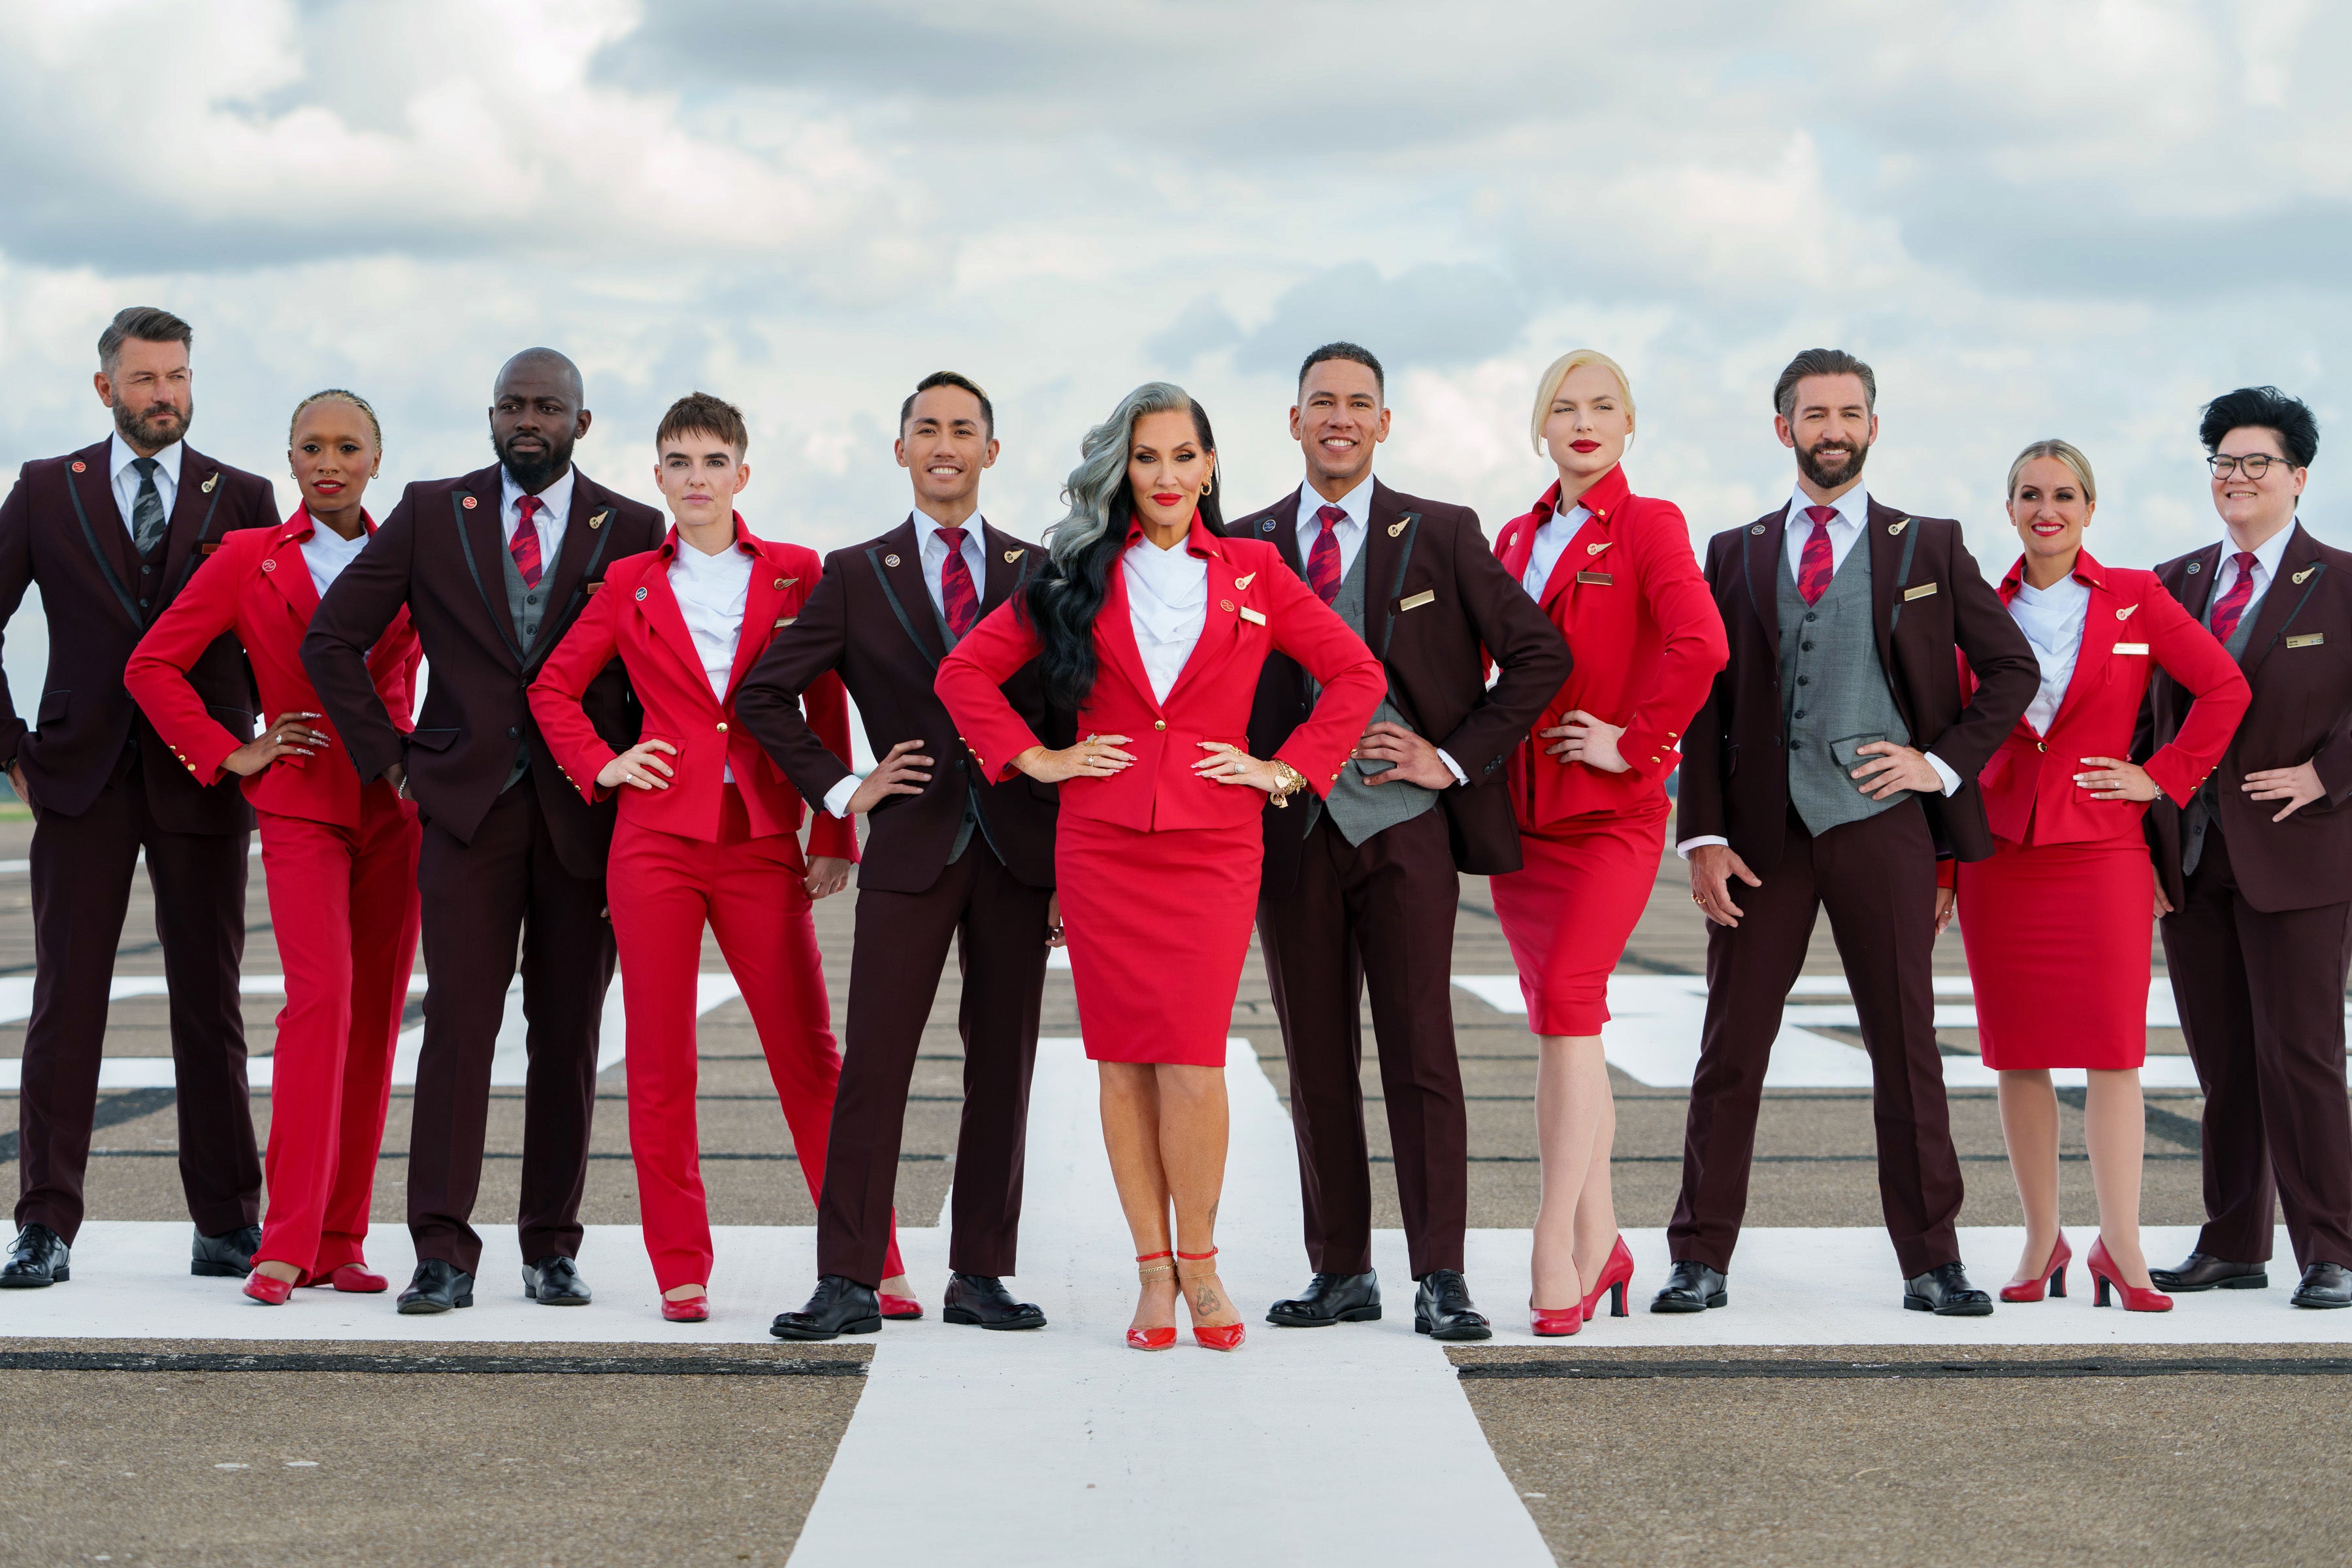 Michelle Visage (centre) with others modelling the Virgin Atlantic uniform options